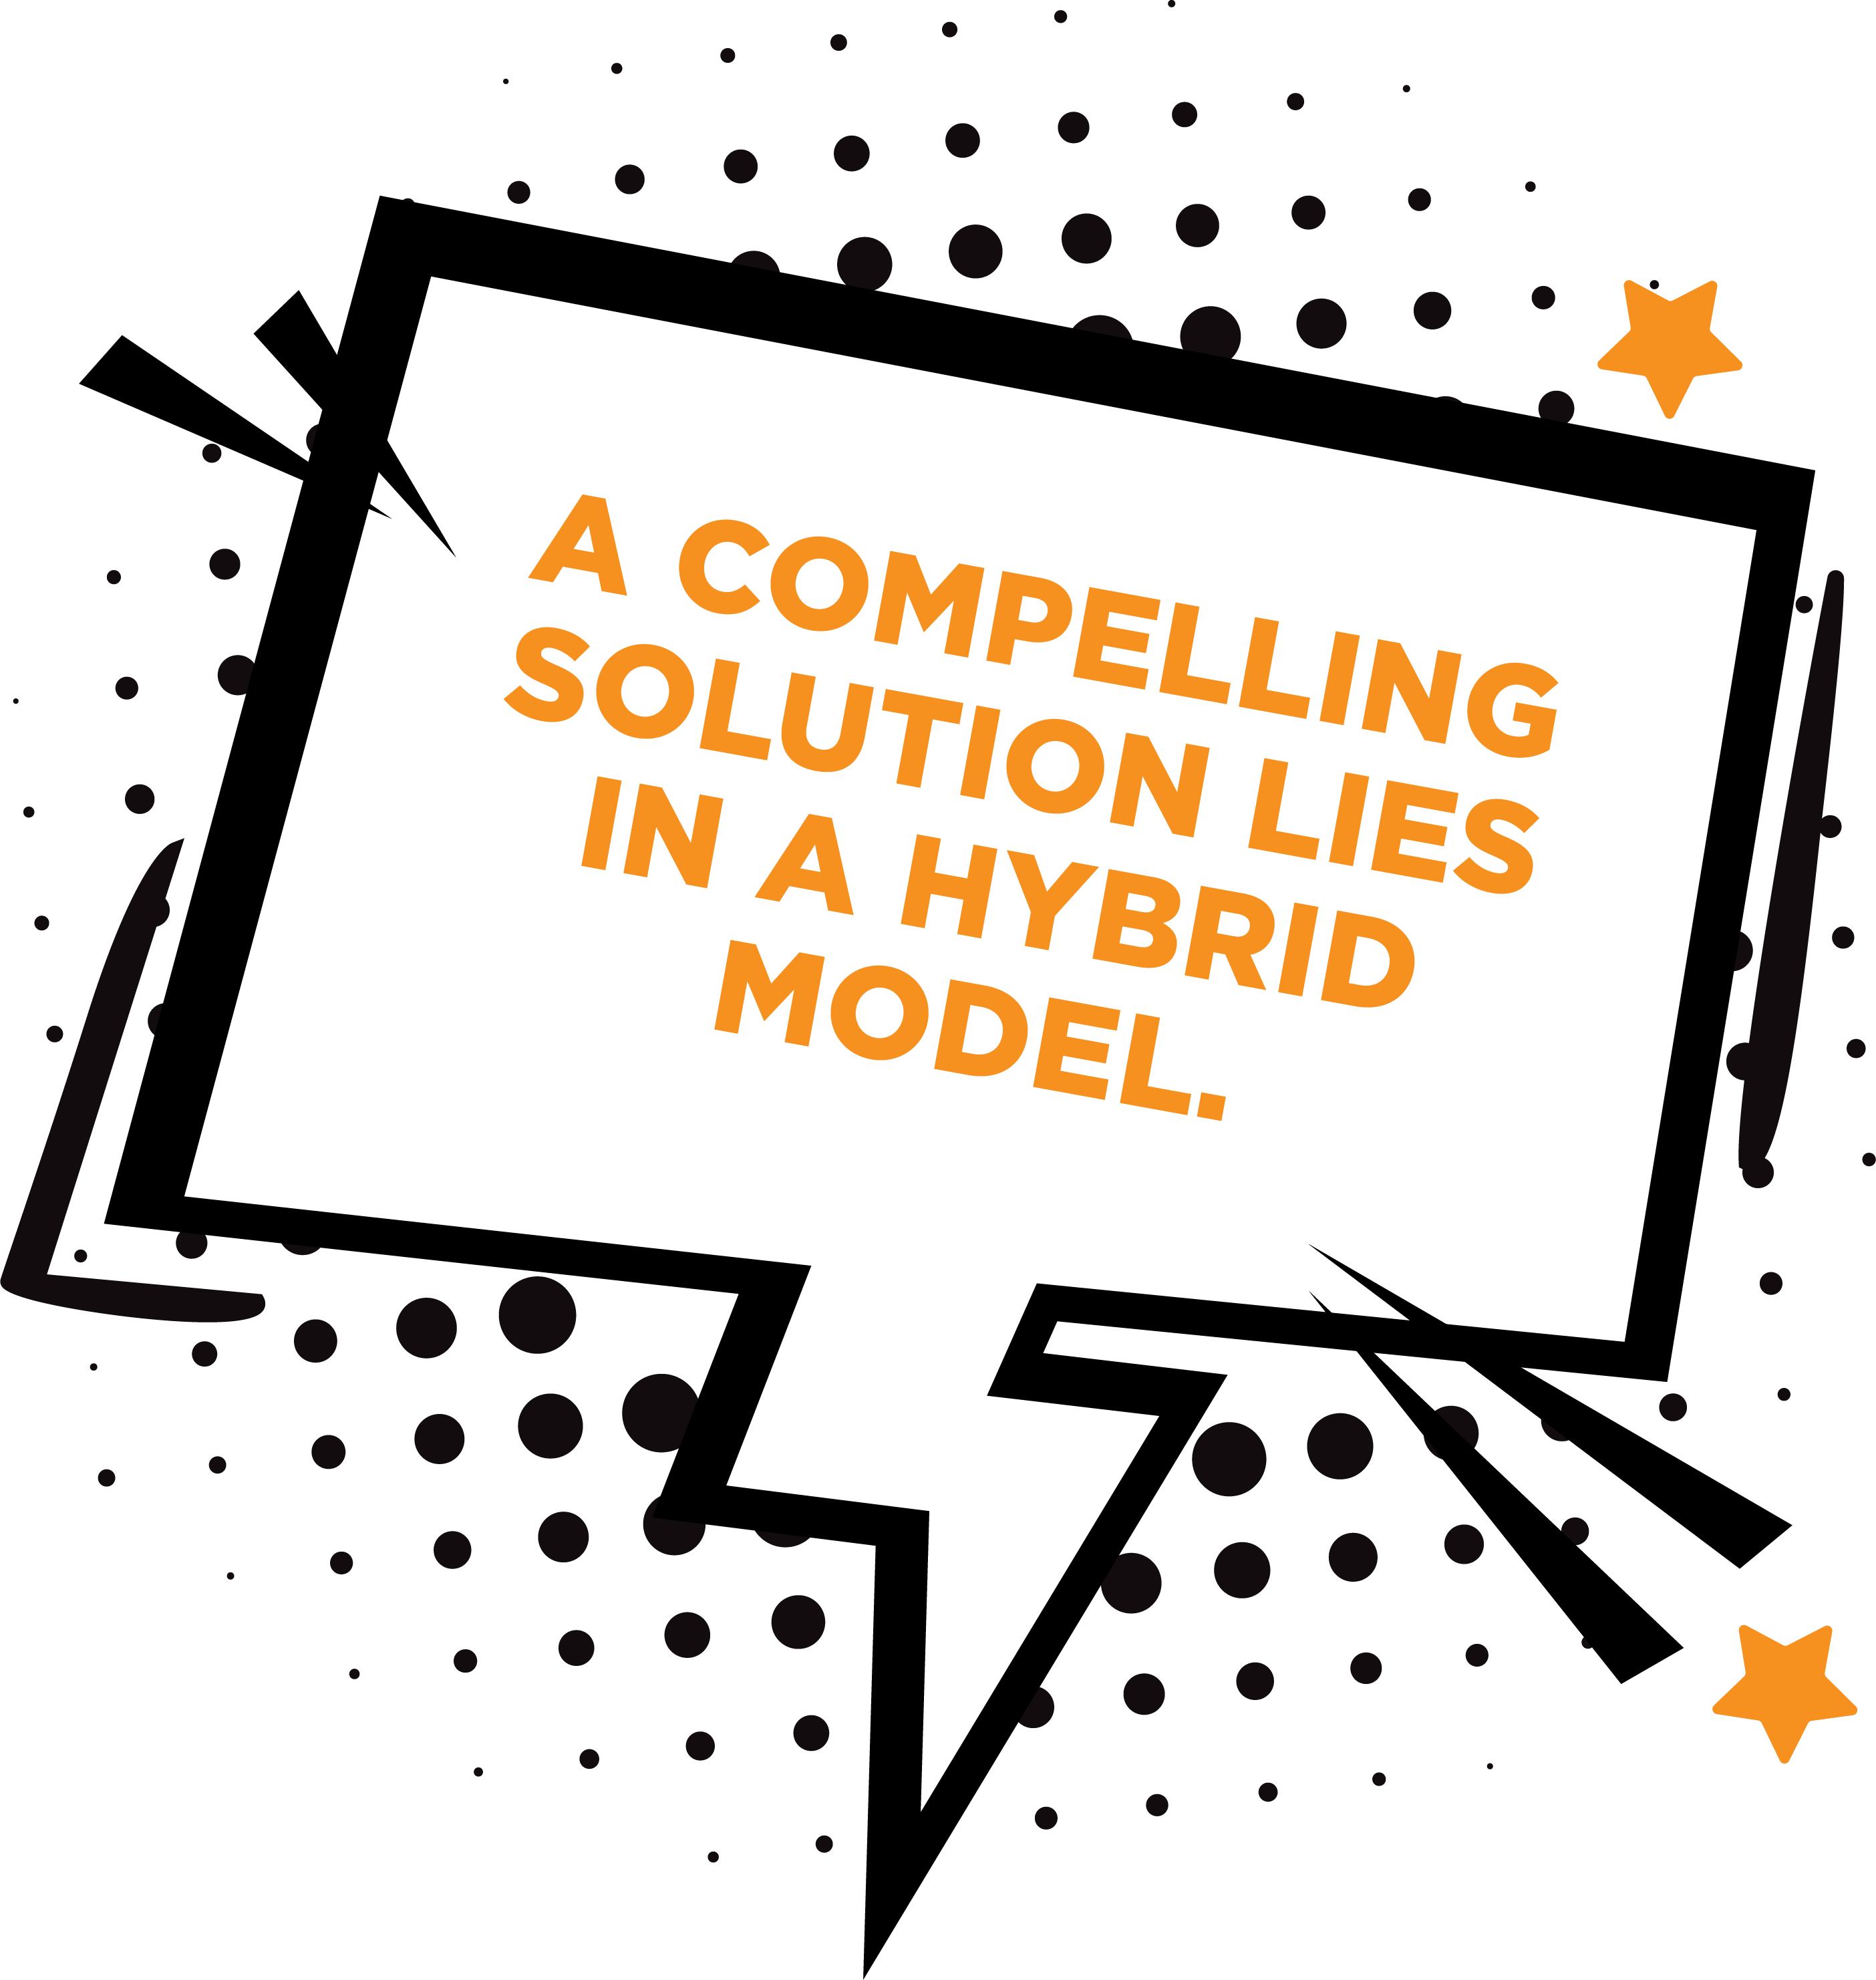 A compelling solution lies in a hybrid model.